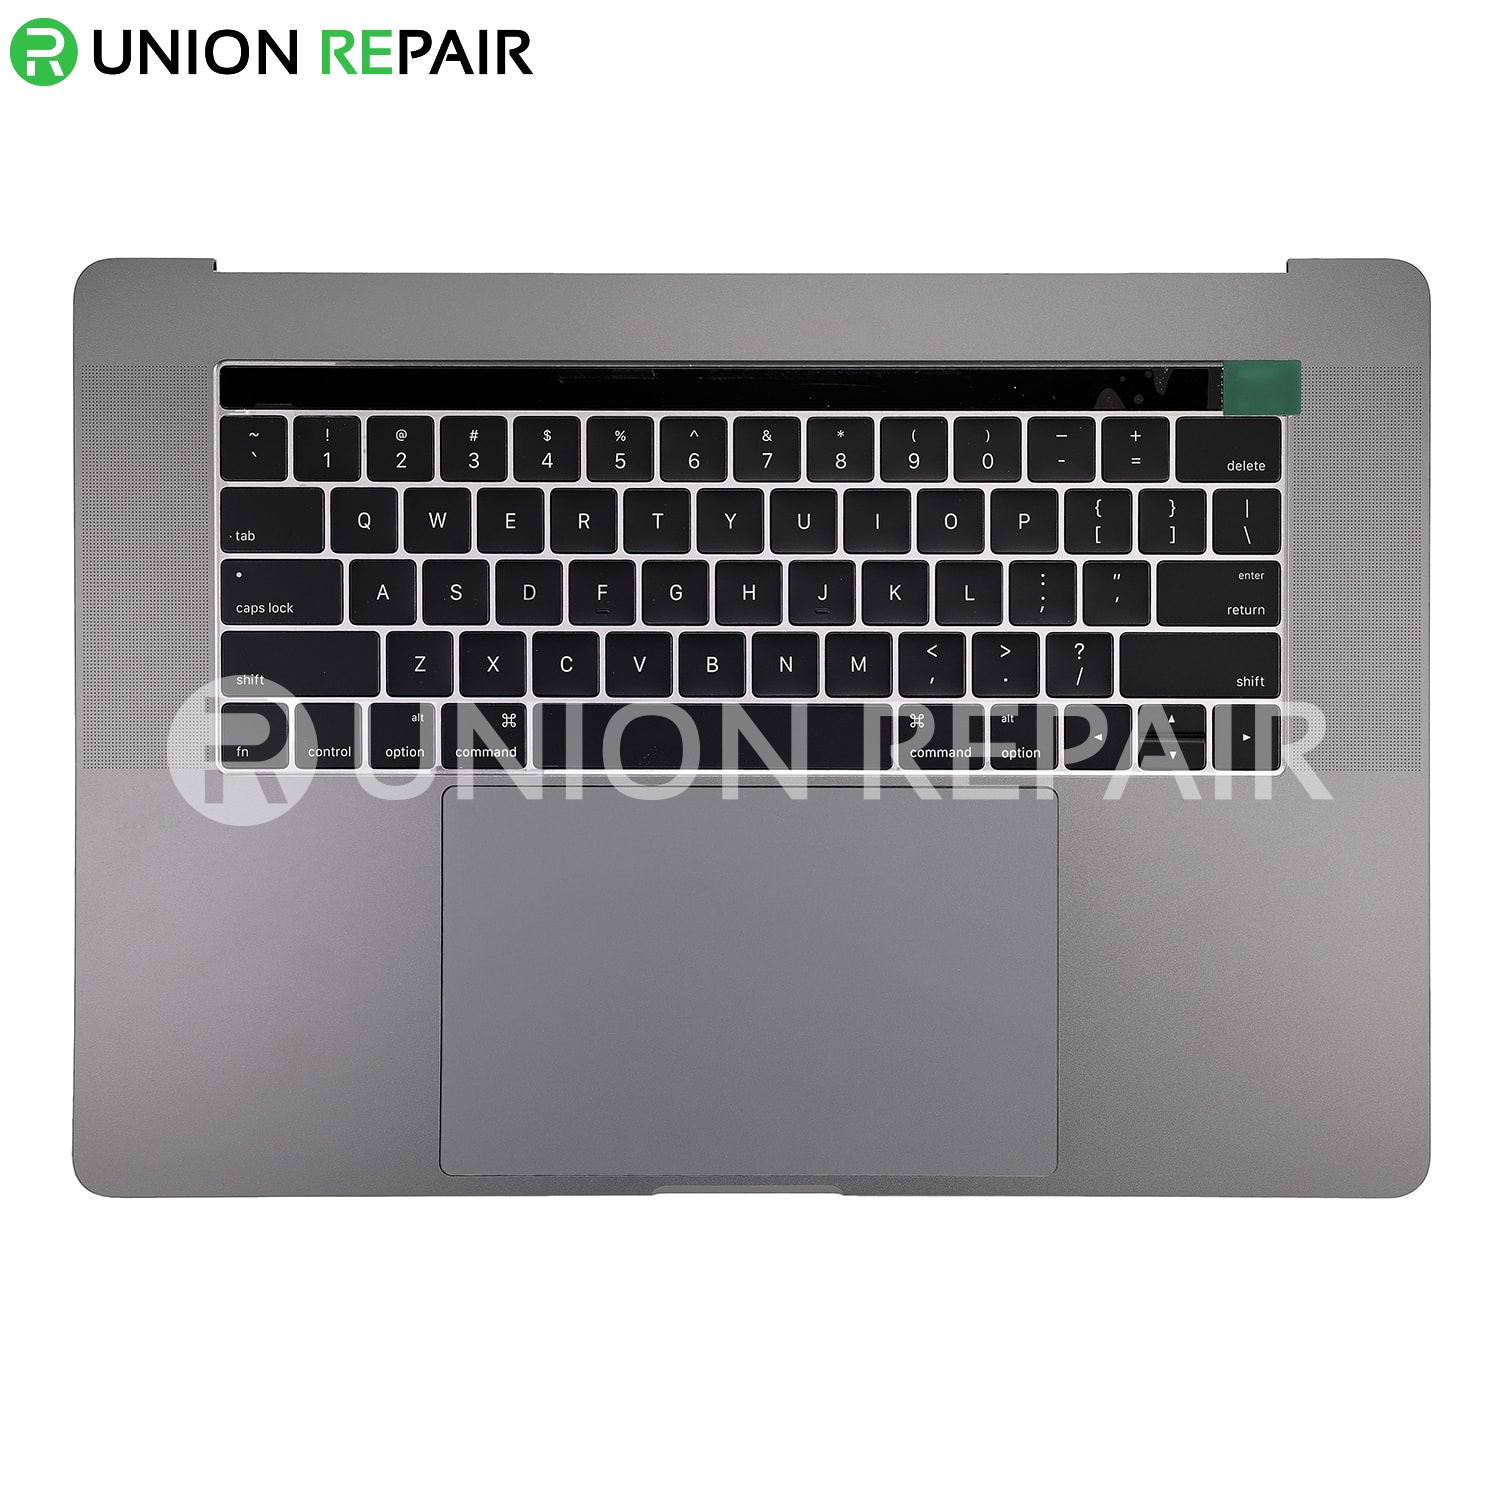 Space Gray Top Case with US English Keyboard for Macbook Pro 15